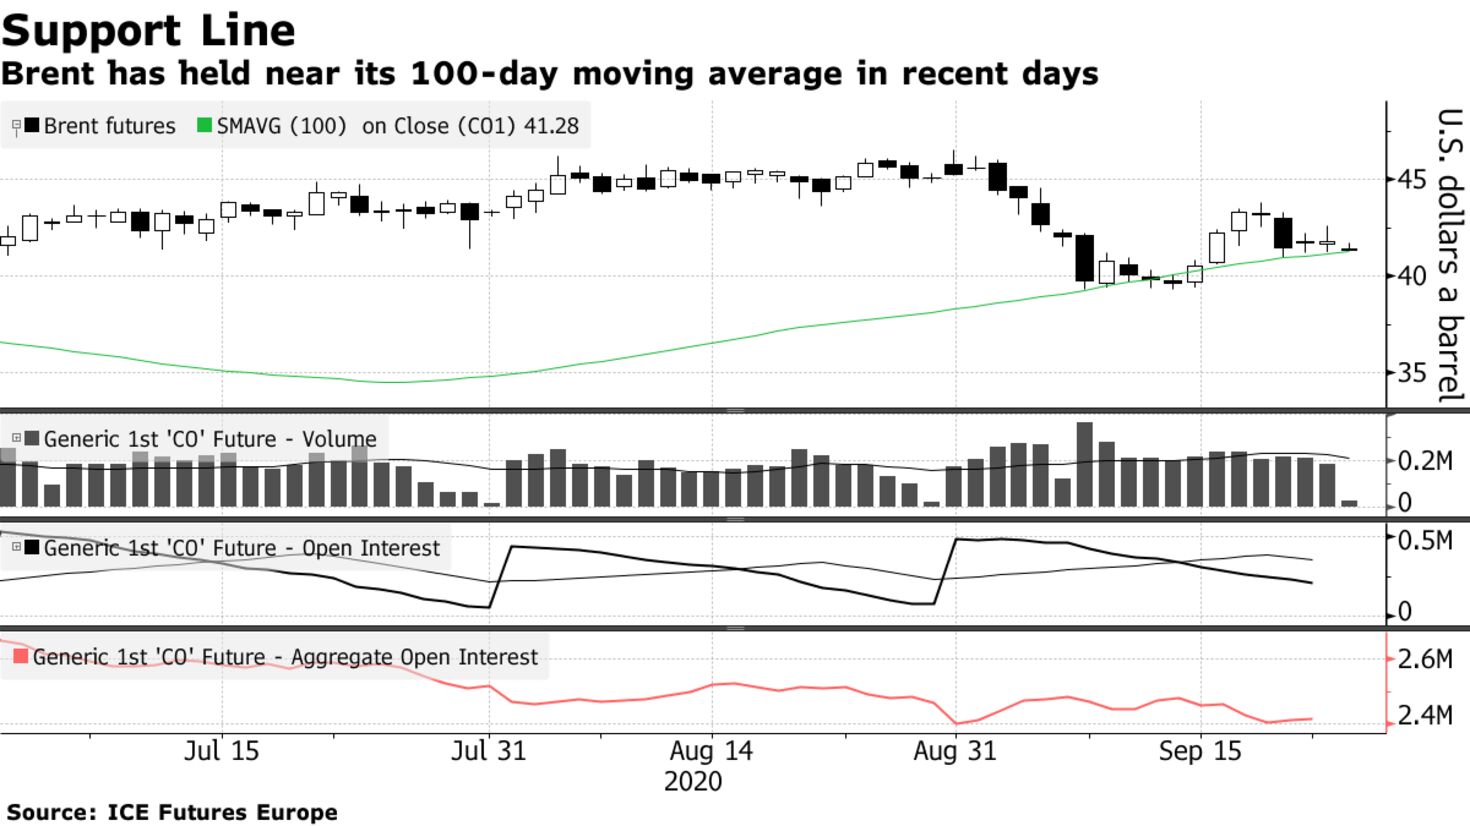 Brent has held near its 100-day moving average in recent days